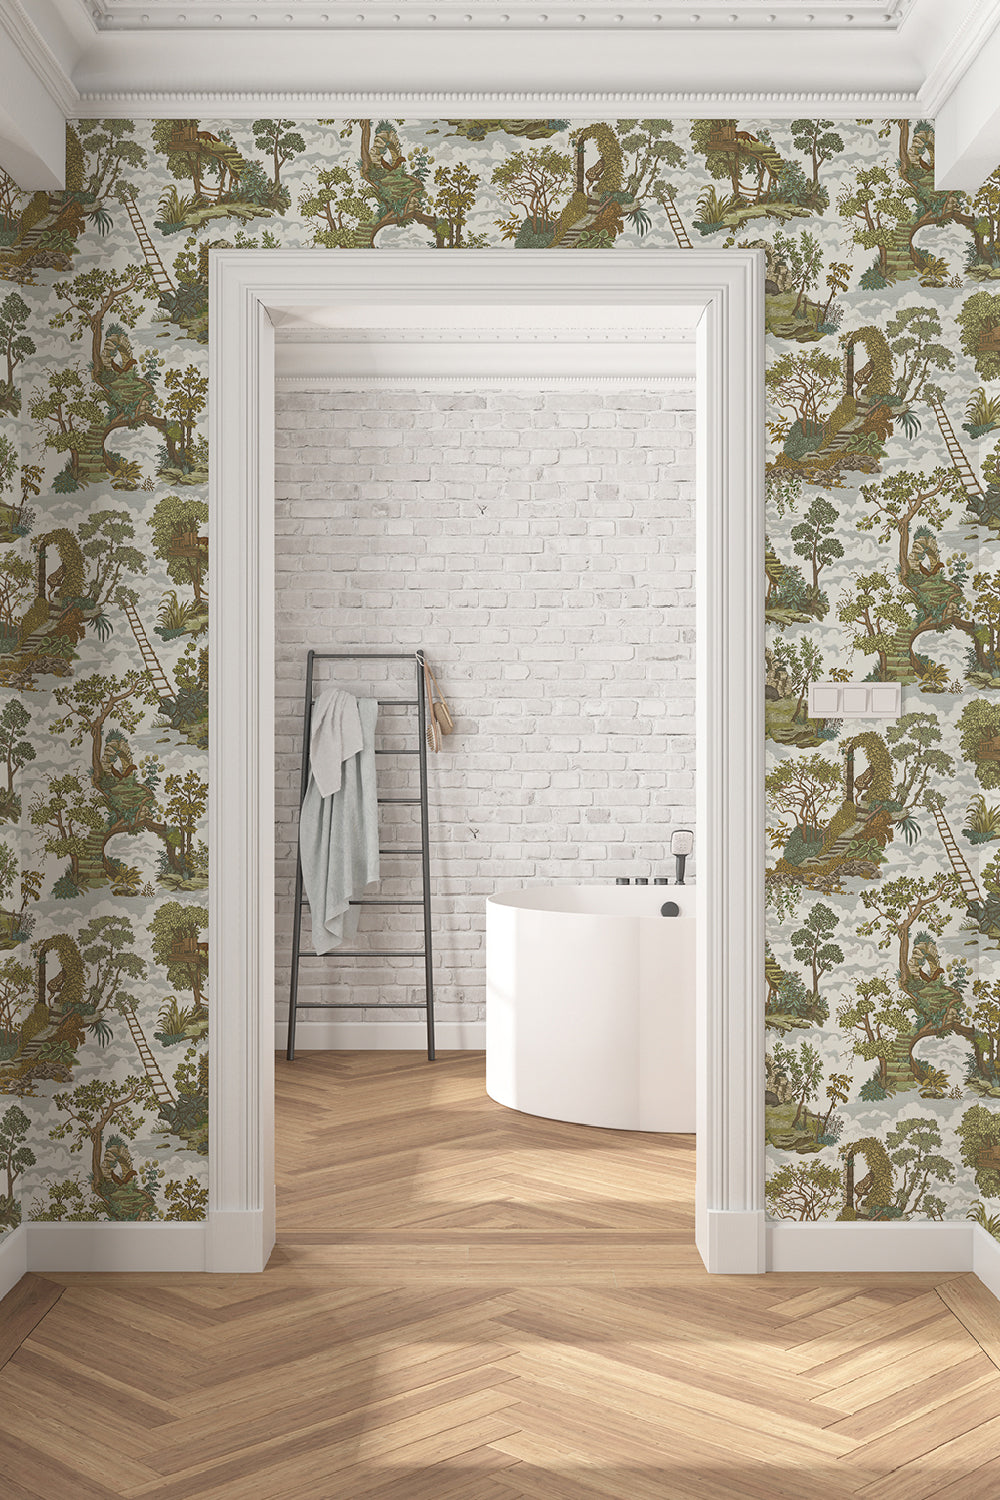 Islet Hoping Toile Wallpaper